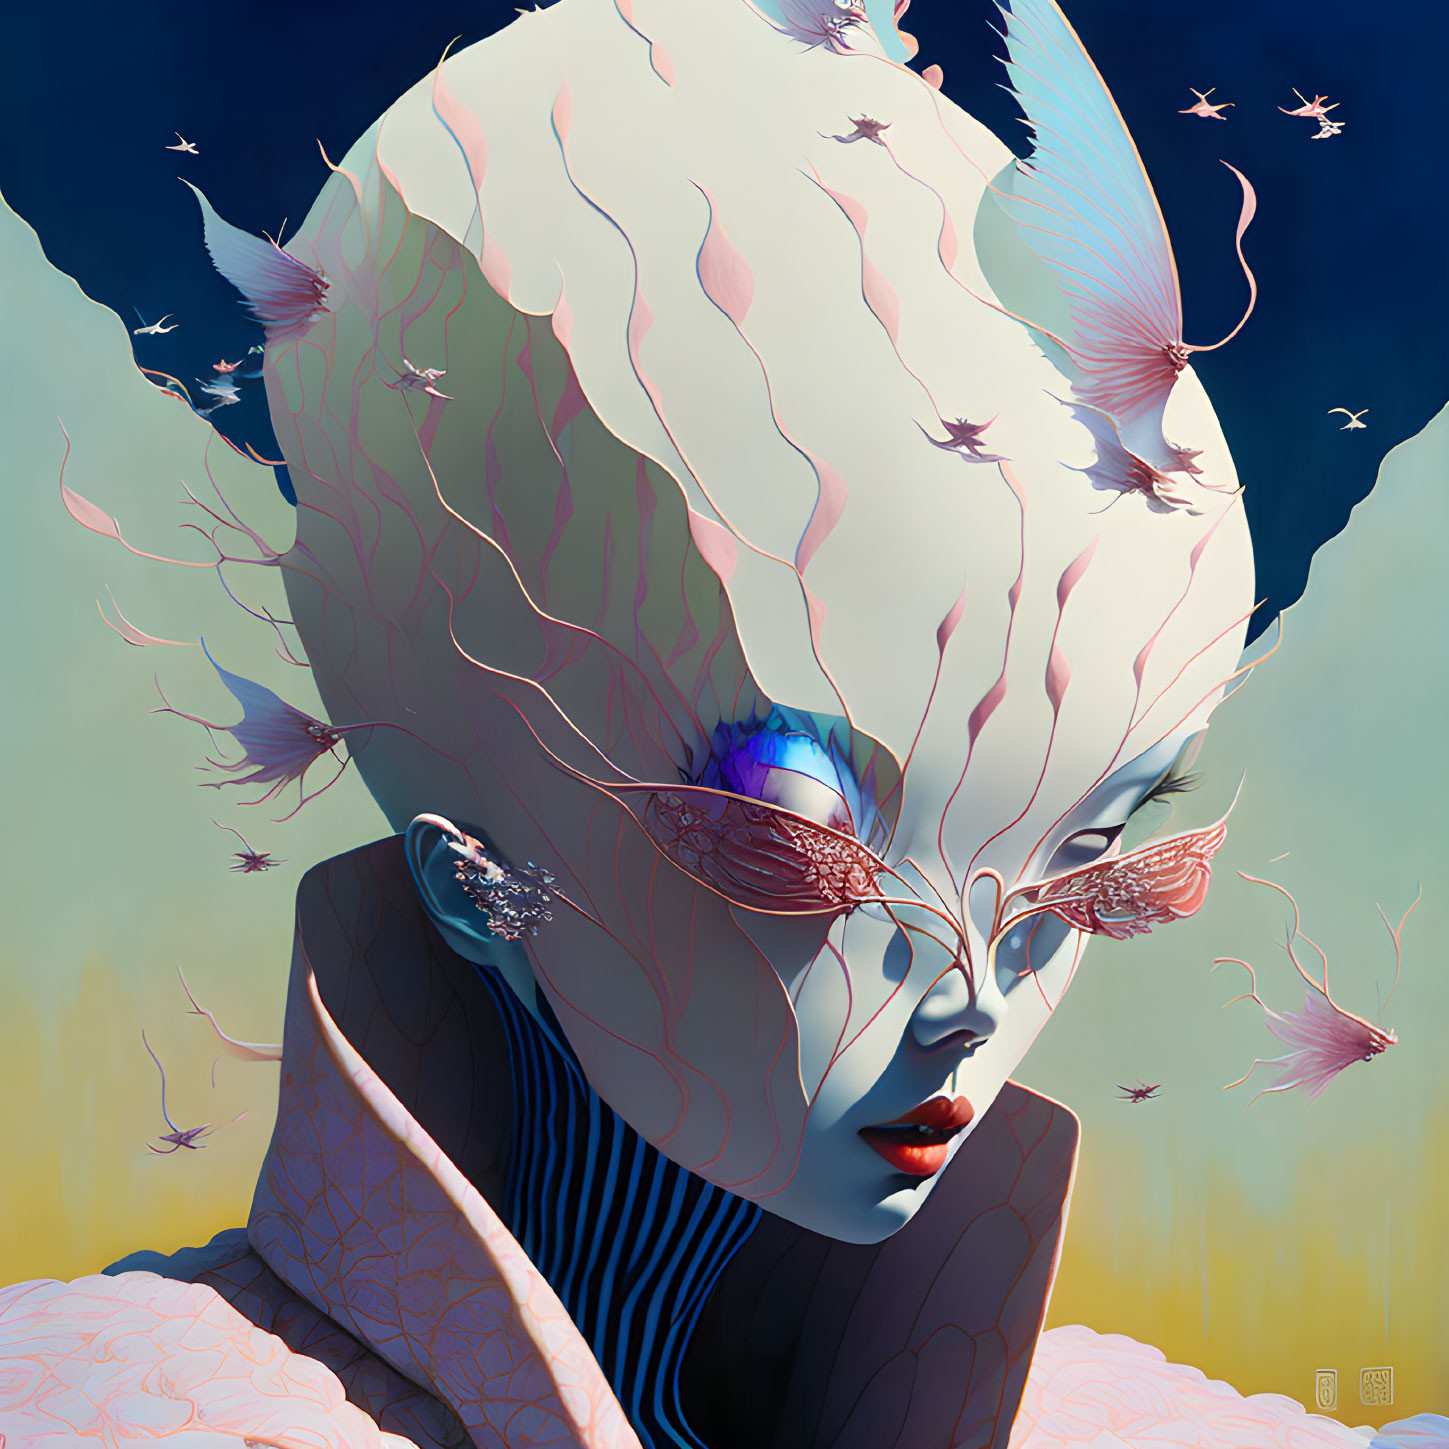 Surreal humanoid figure with elongated white head and pink accents, surrounded by birds on blue background